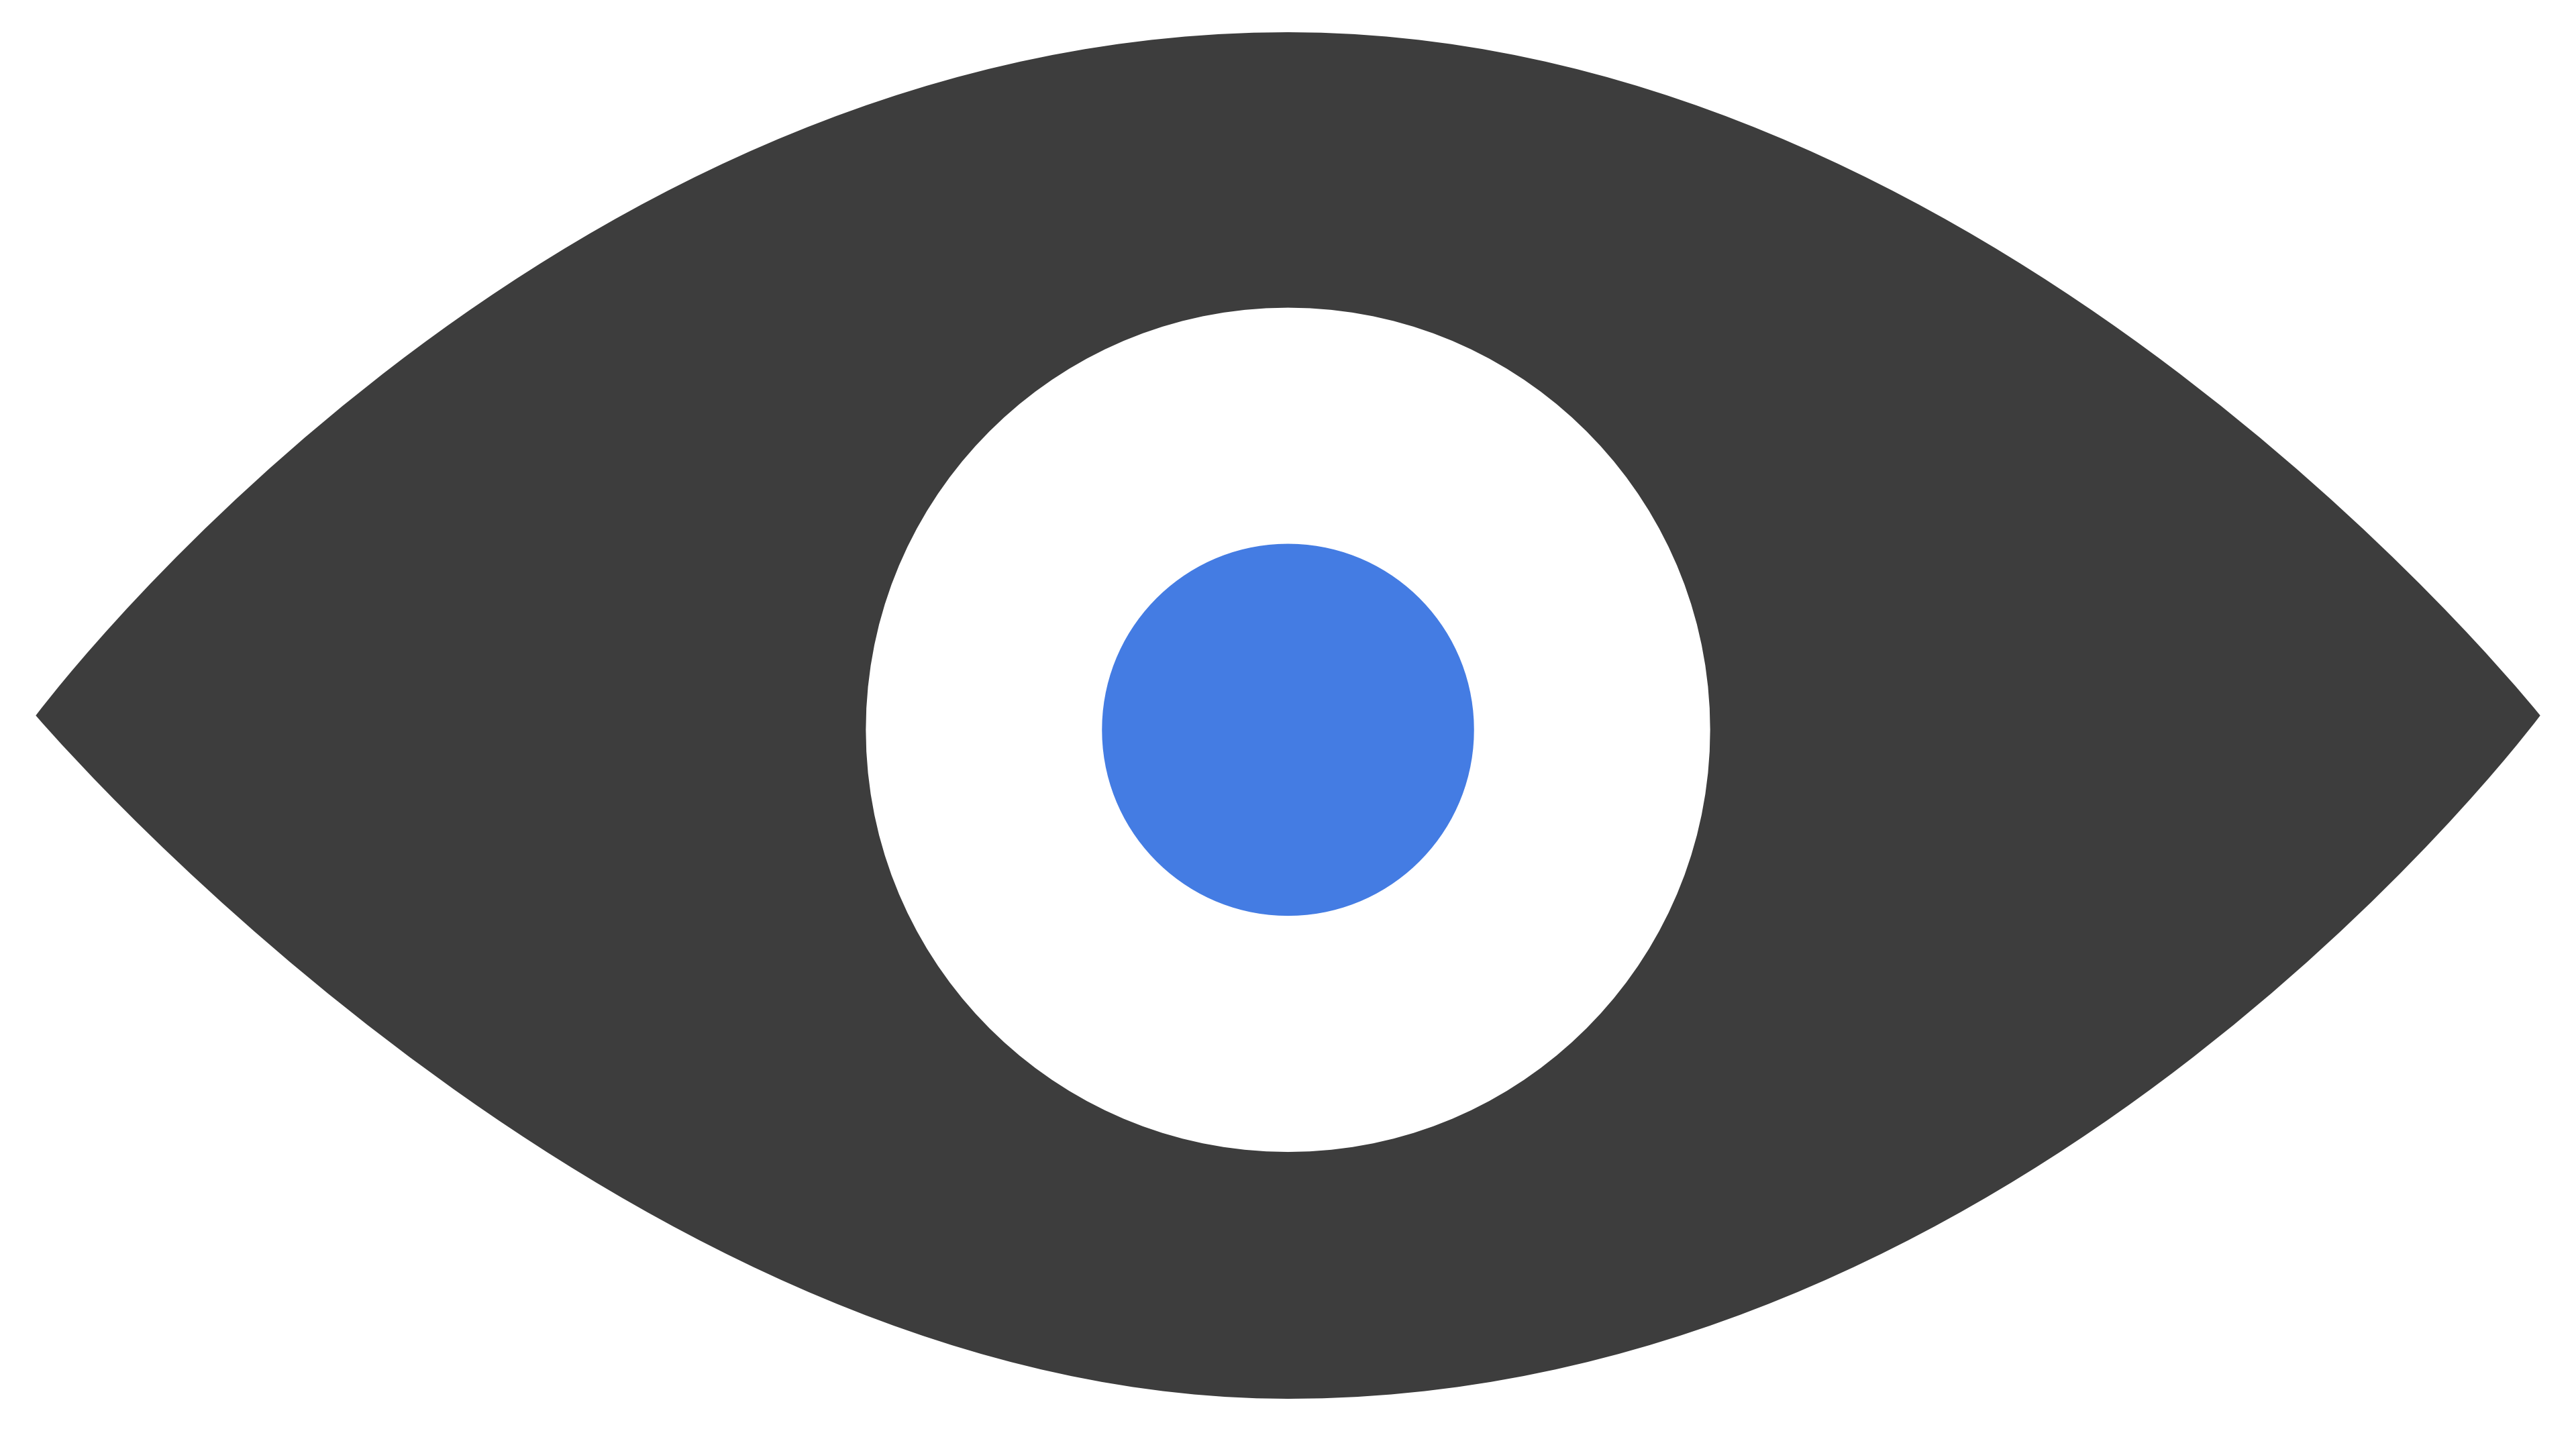 Oculus Logo - I made an SVG of the Oculus eye logo - the grey in the logo is ...